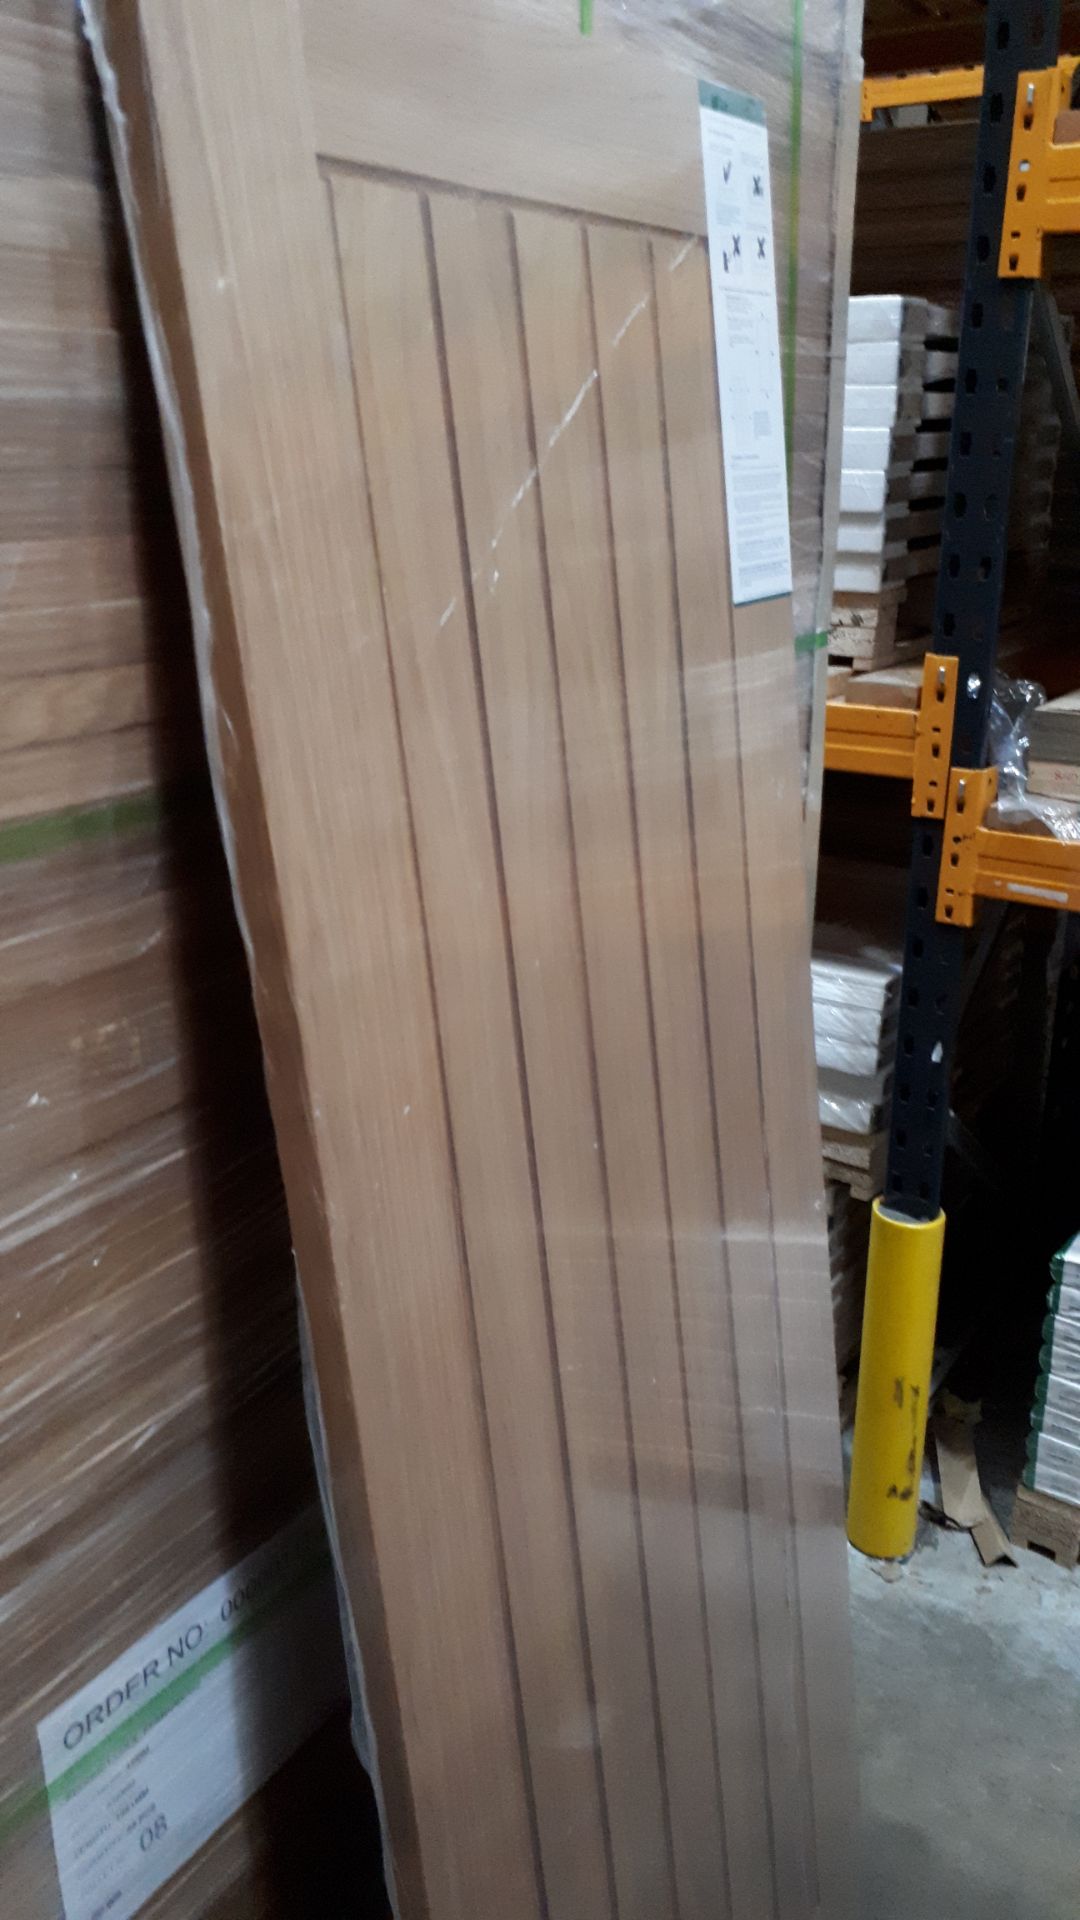 6 x Mexicano White Oak P/F Int 78”x33”x35mm - Lots to be handed out in order they are stacked, at - Image 3 of 3